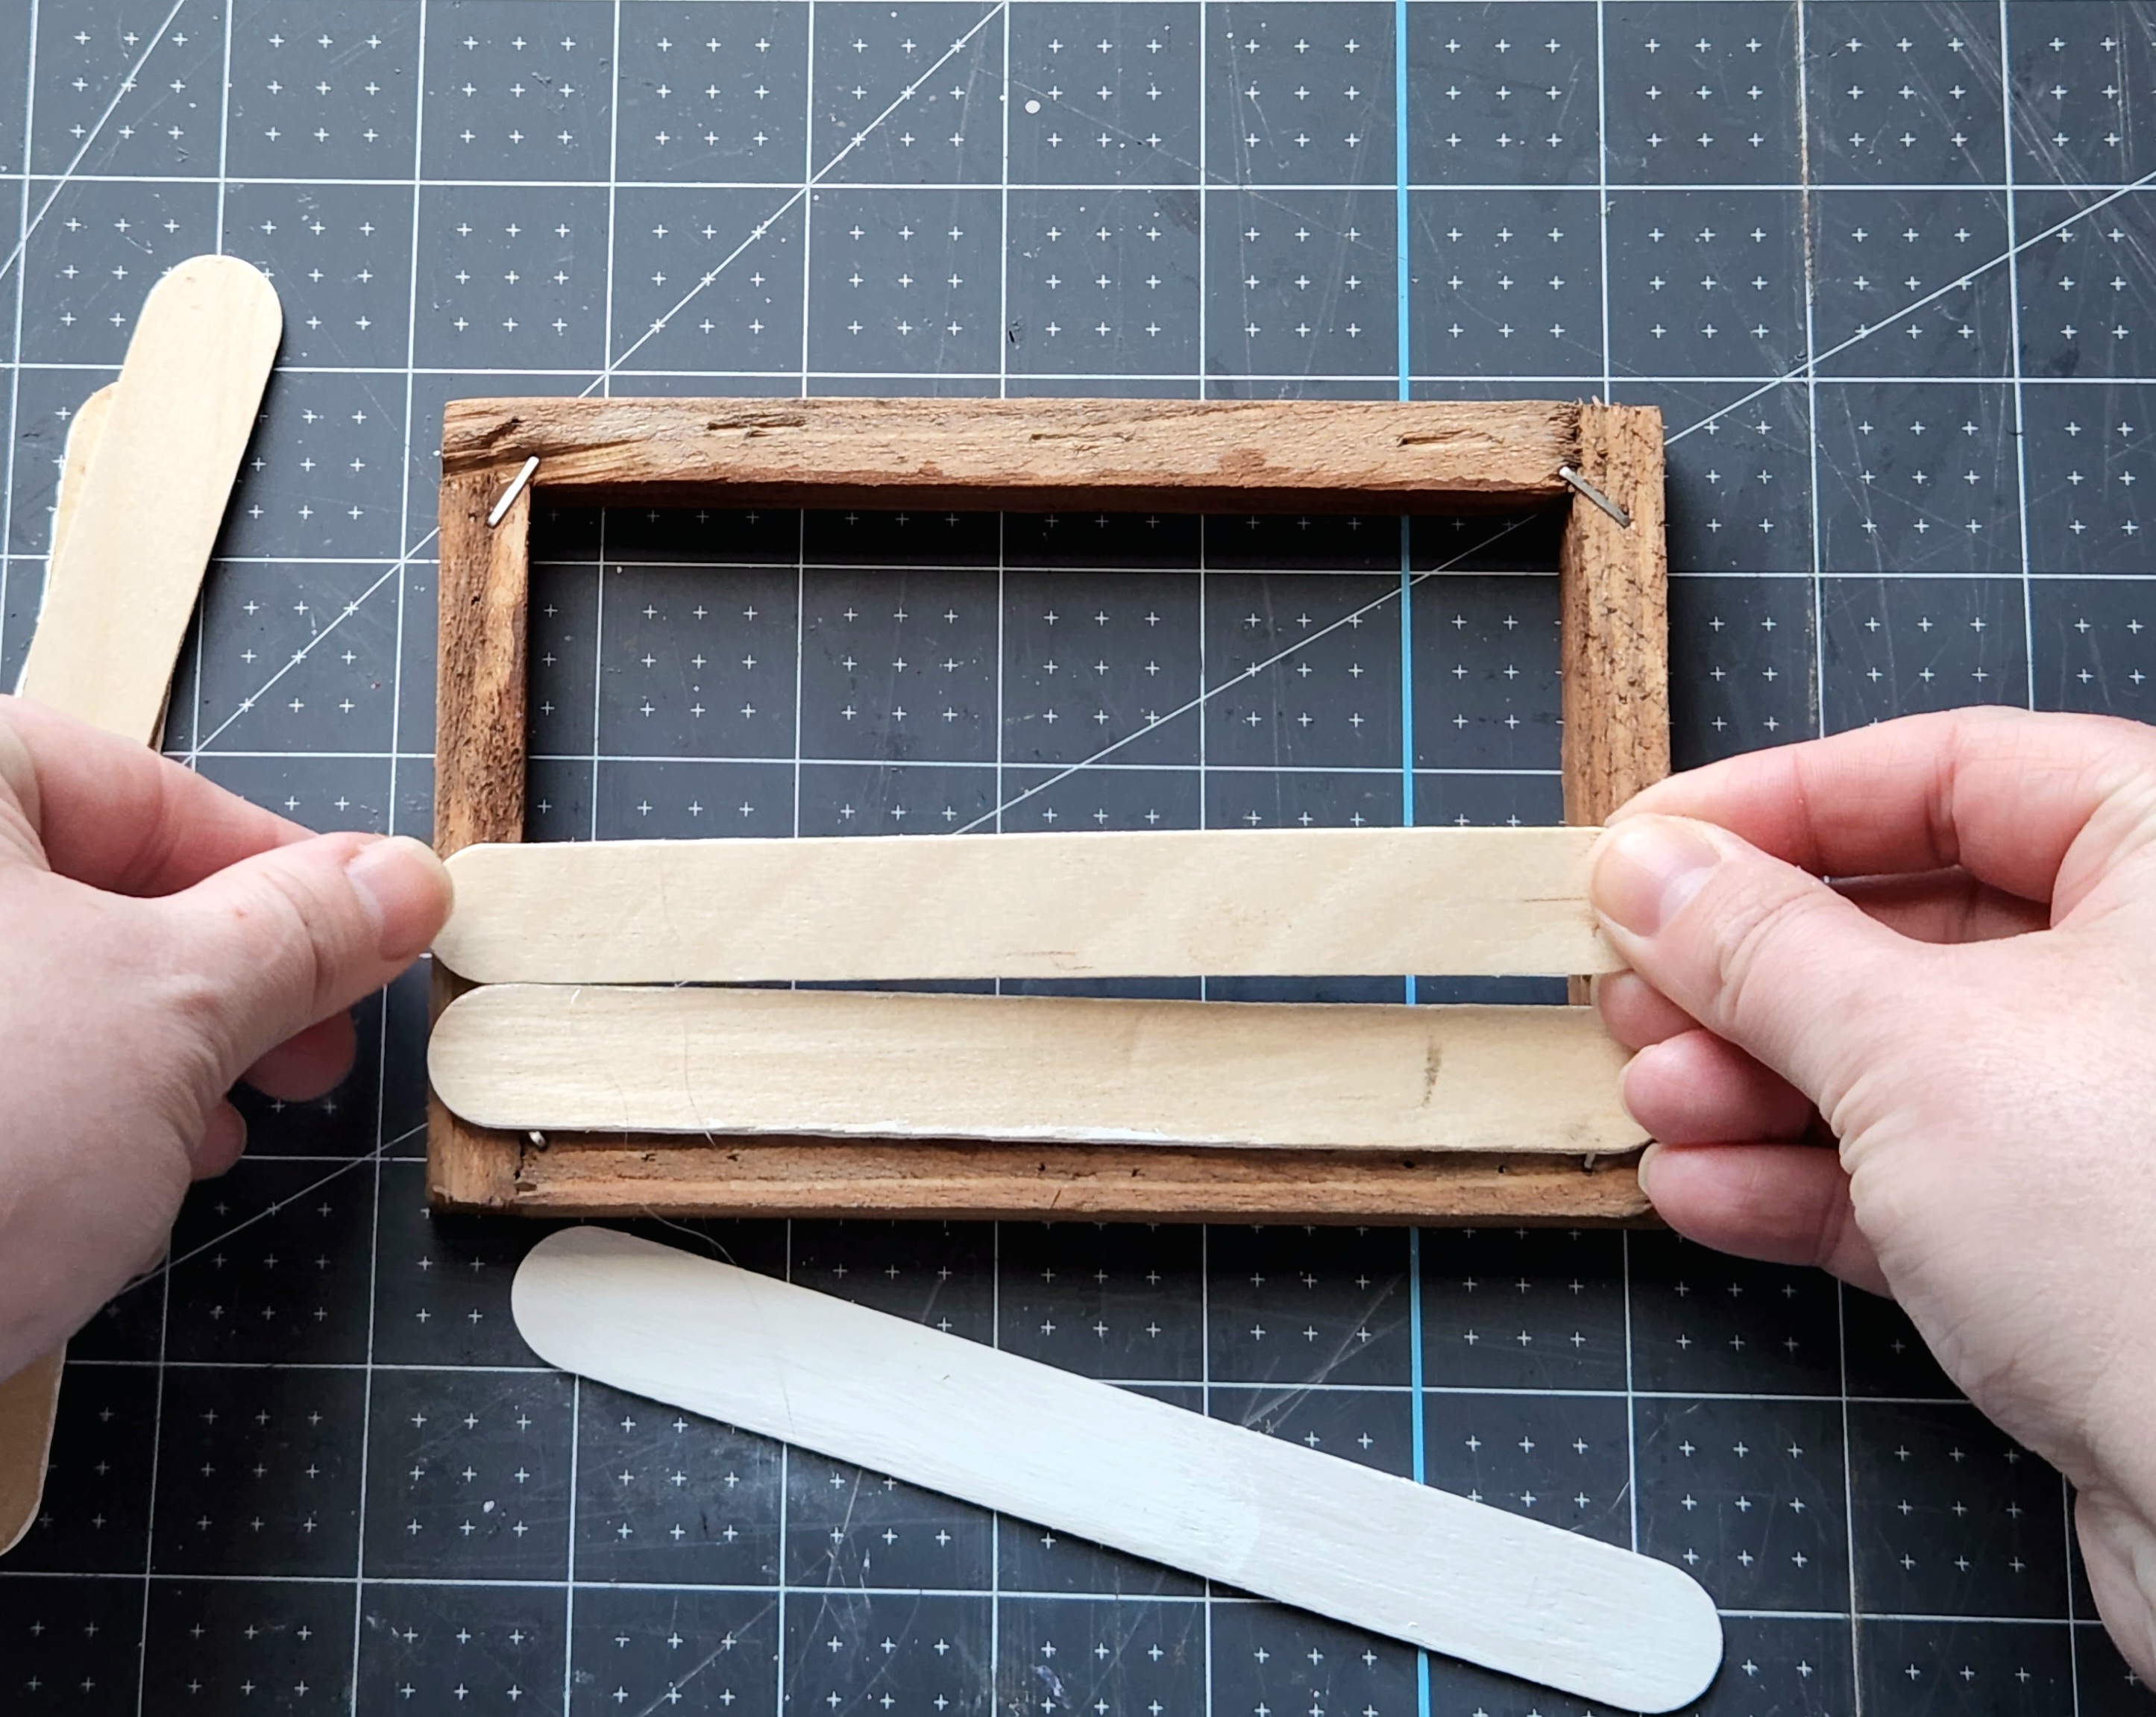 Placing a painted popsicle stick on top of the hot glue on the back of the wood frame completely covering the opening of the Dollar Tree canvase frame.